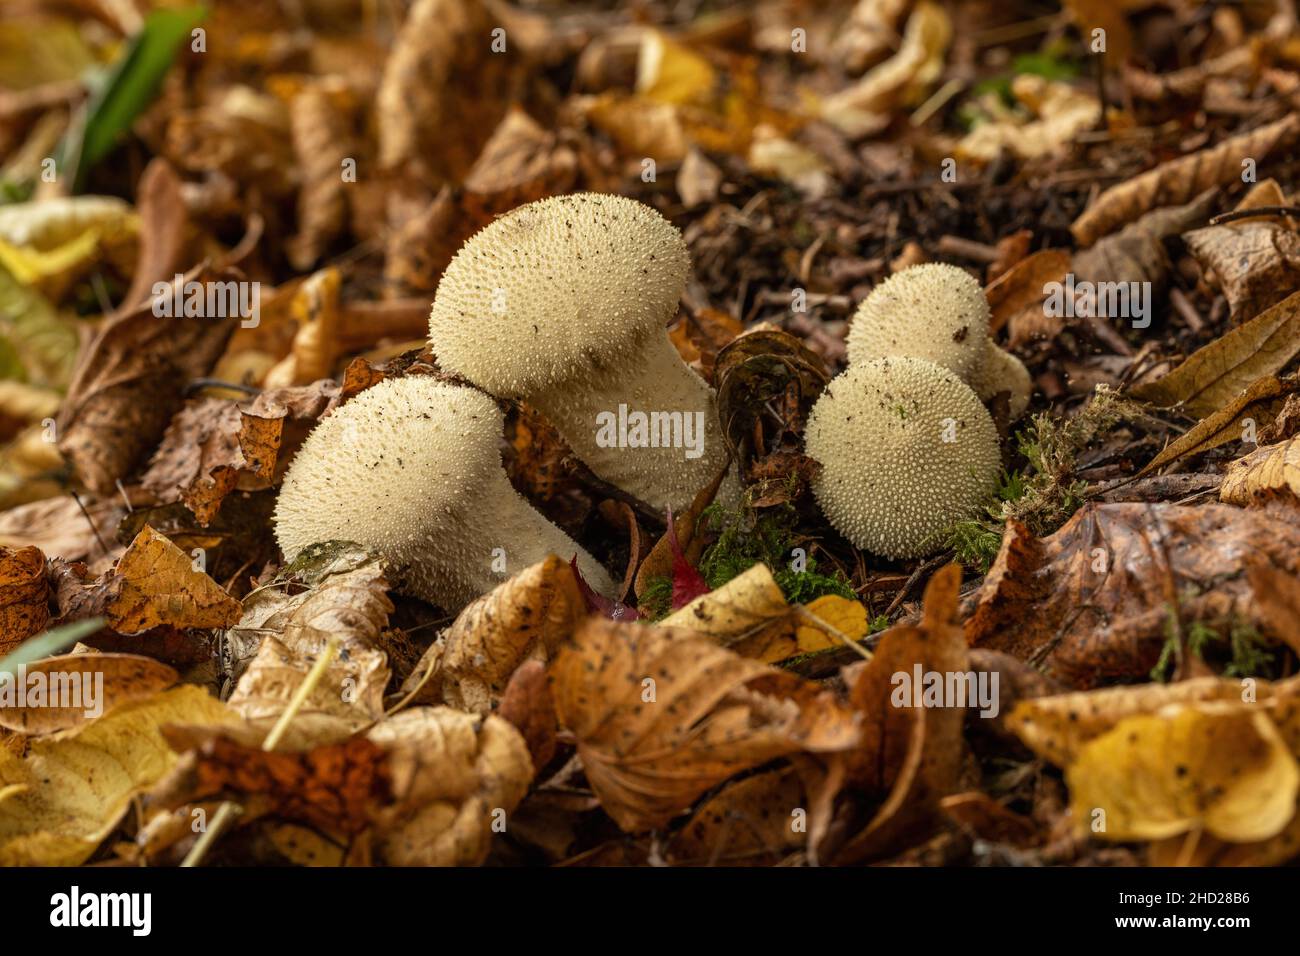 Close up of four puffball mushrooms on the forest floor in Autumn amongst fallen golden leaves, England, UK Stock Photo